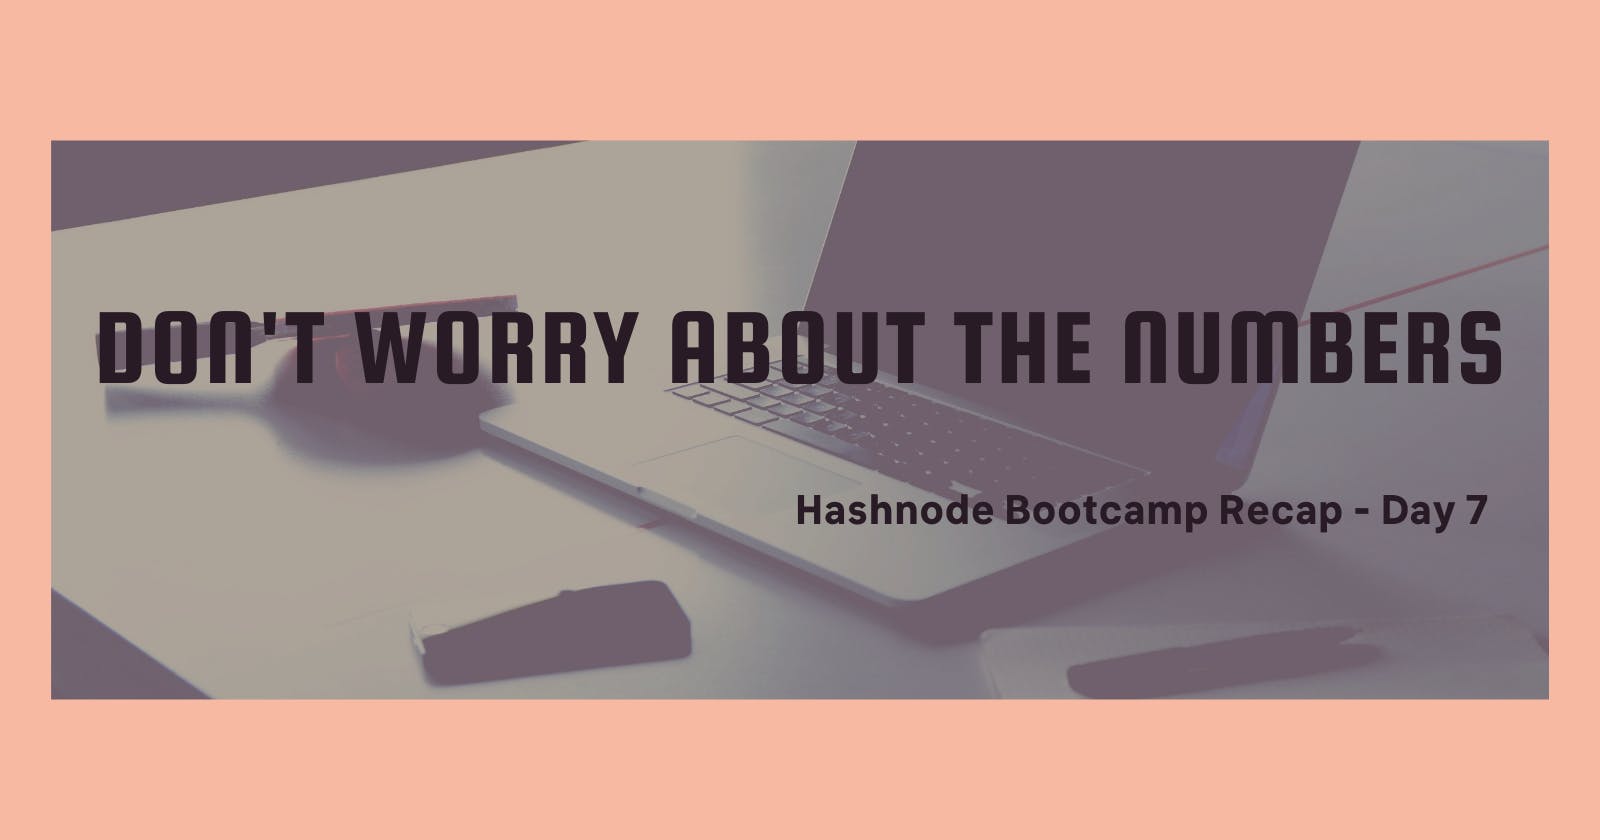 Hashnode Bootcamp: Don't Worry About The Numbers